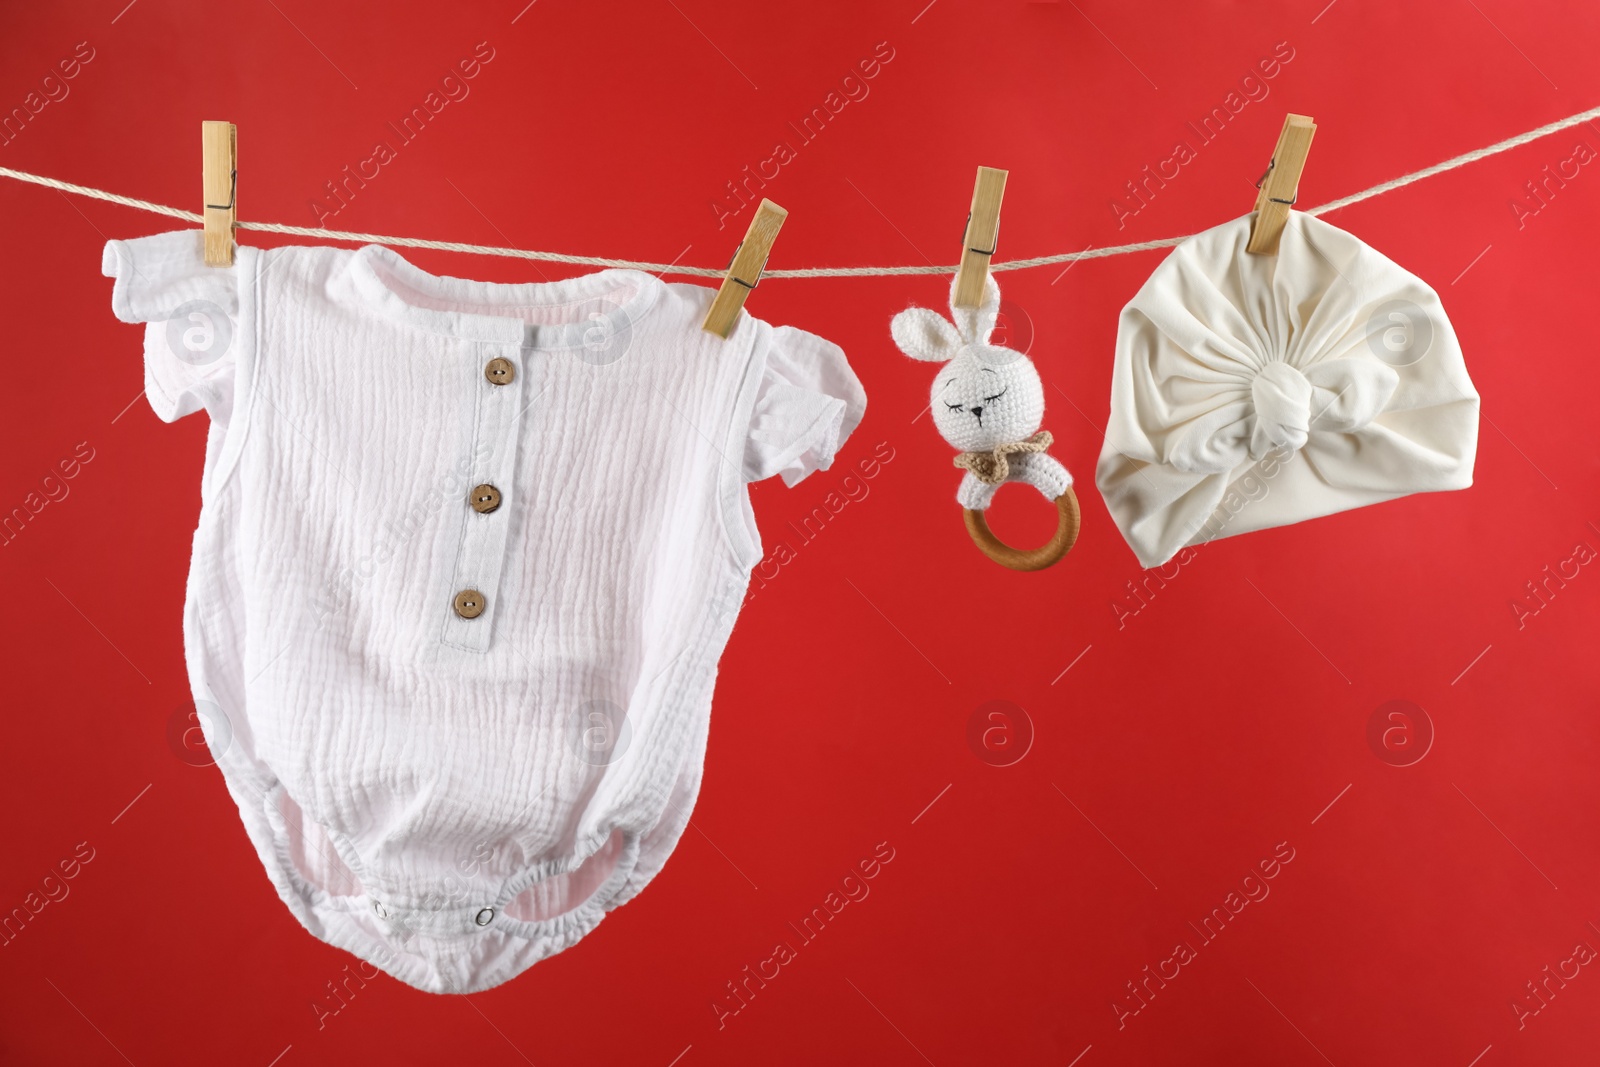 Photo of Baby clothes and accessories hanging on washing line against red background